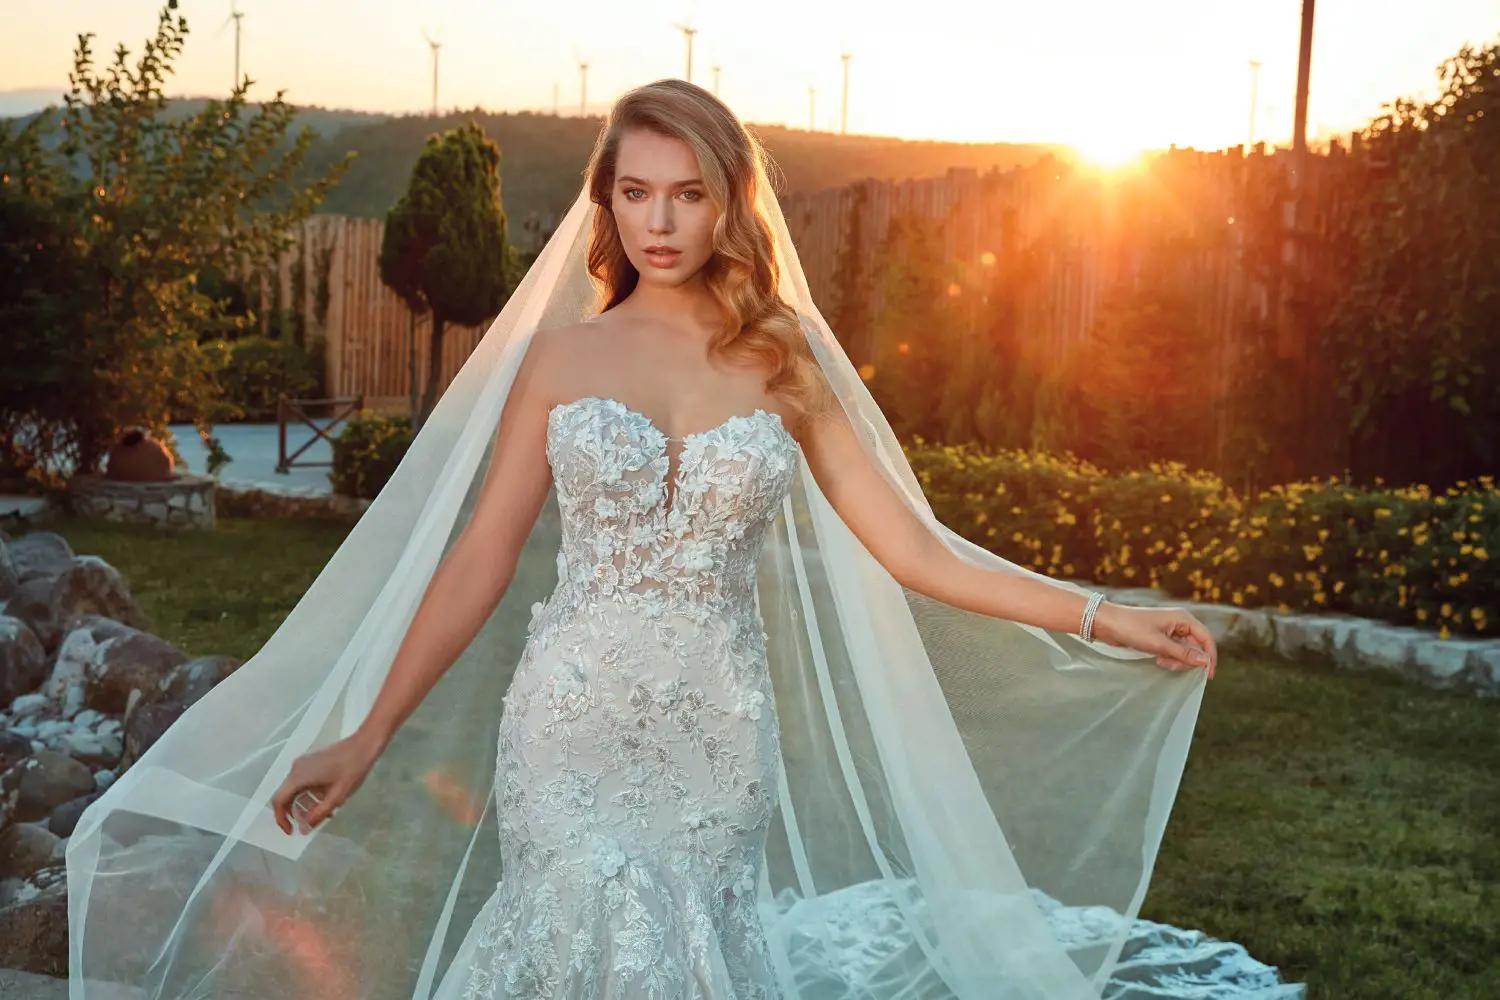 Model wearing a bridal gown at the grass